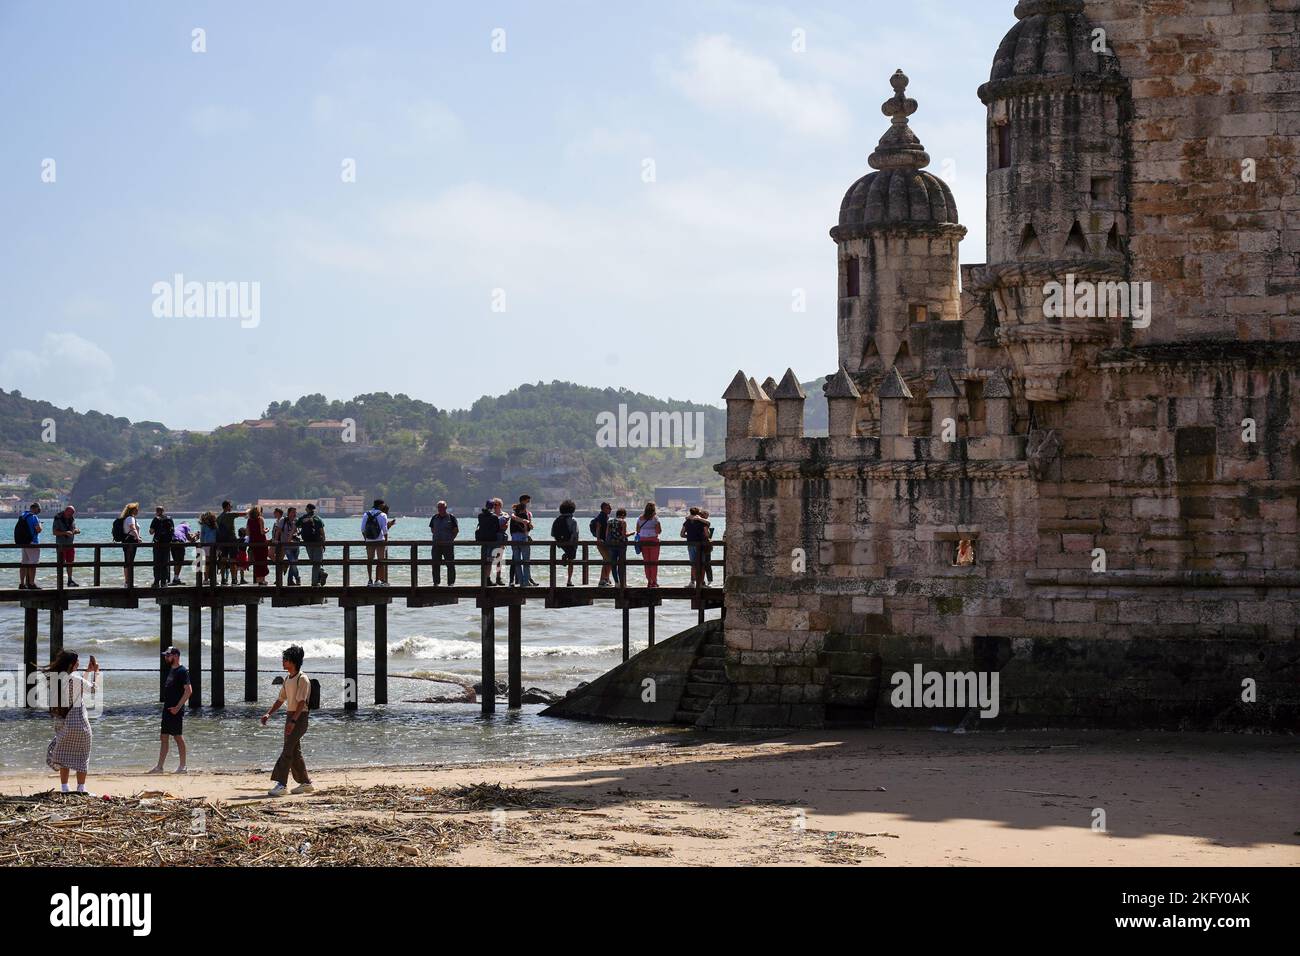 Lisbon, Portugal - September 2022: Torre de Belem (Belem Tower) is a 16th century fortification in Lisbon and a gateway to the city. Stock Photo